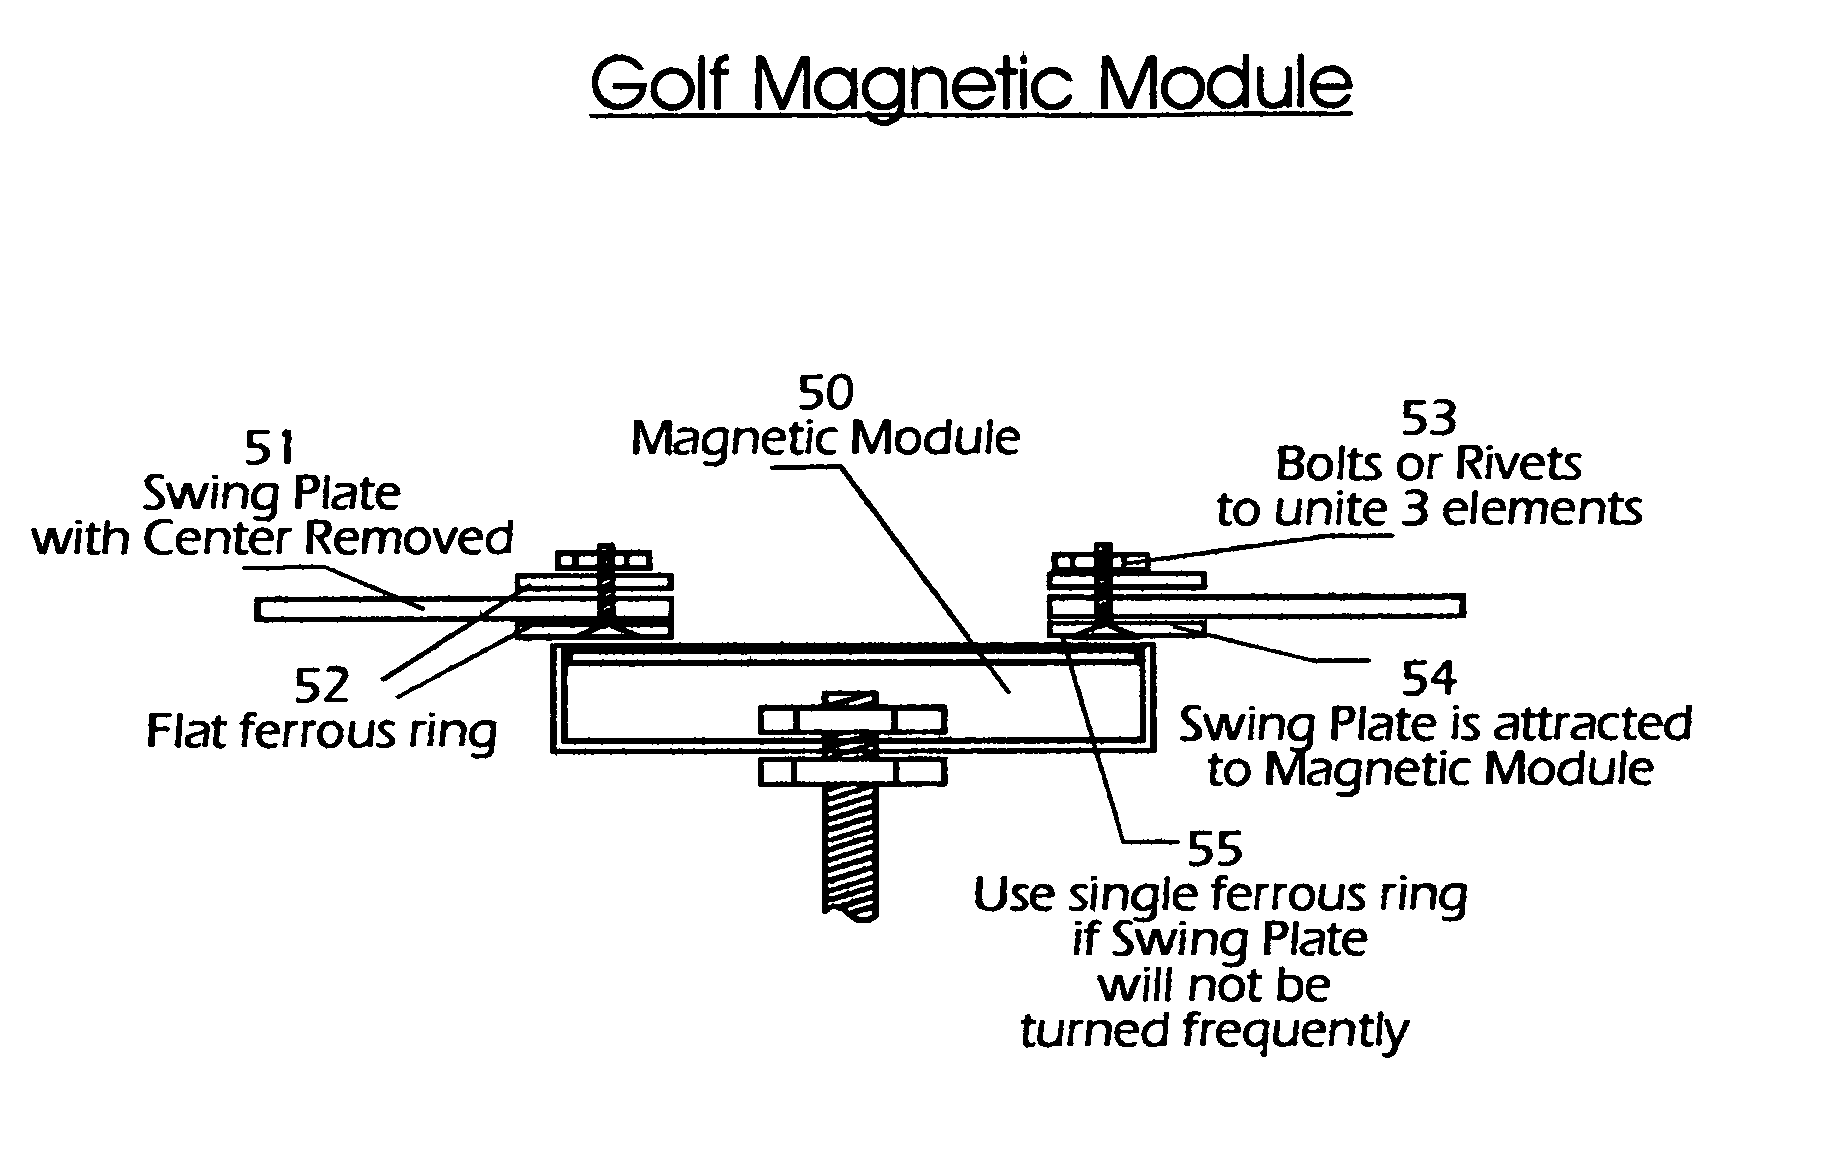 Magnetic module golf swing learning, training, and practice device